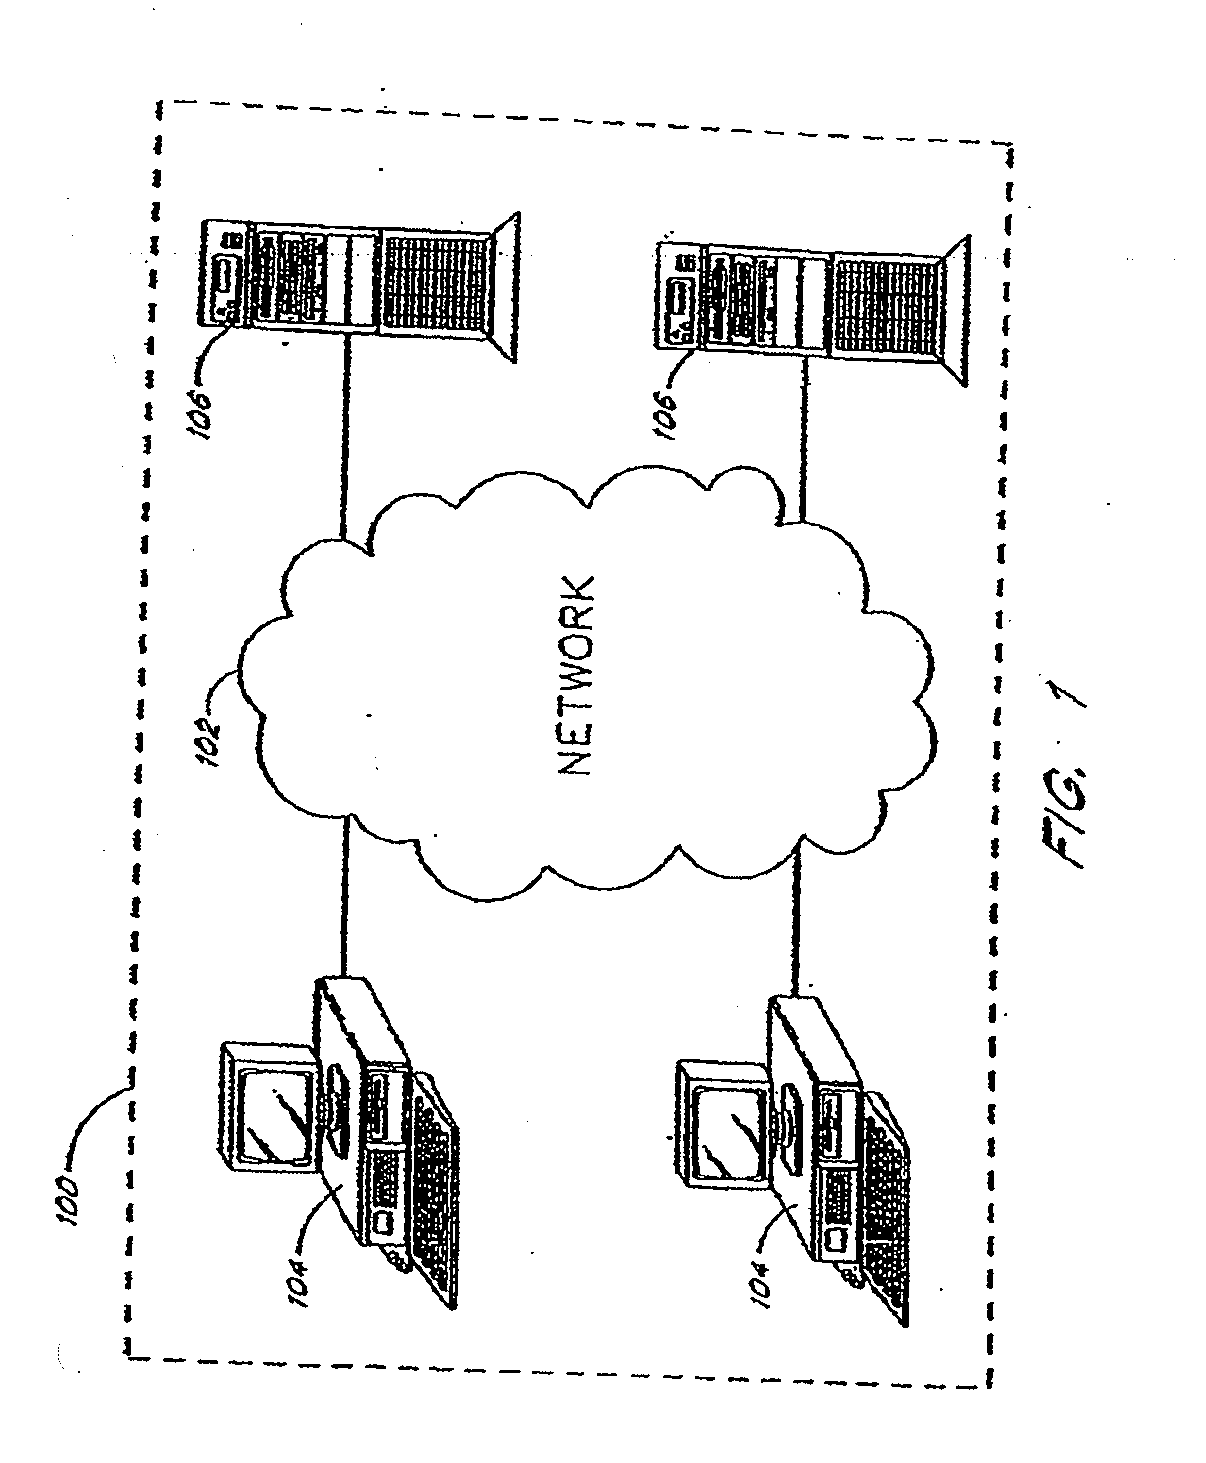 System and method for evaluating changes in the efficiency of an HVAC system